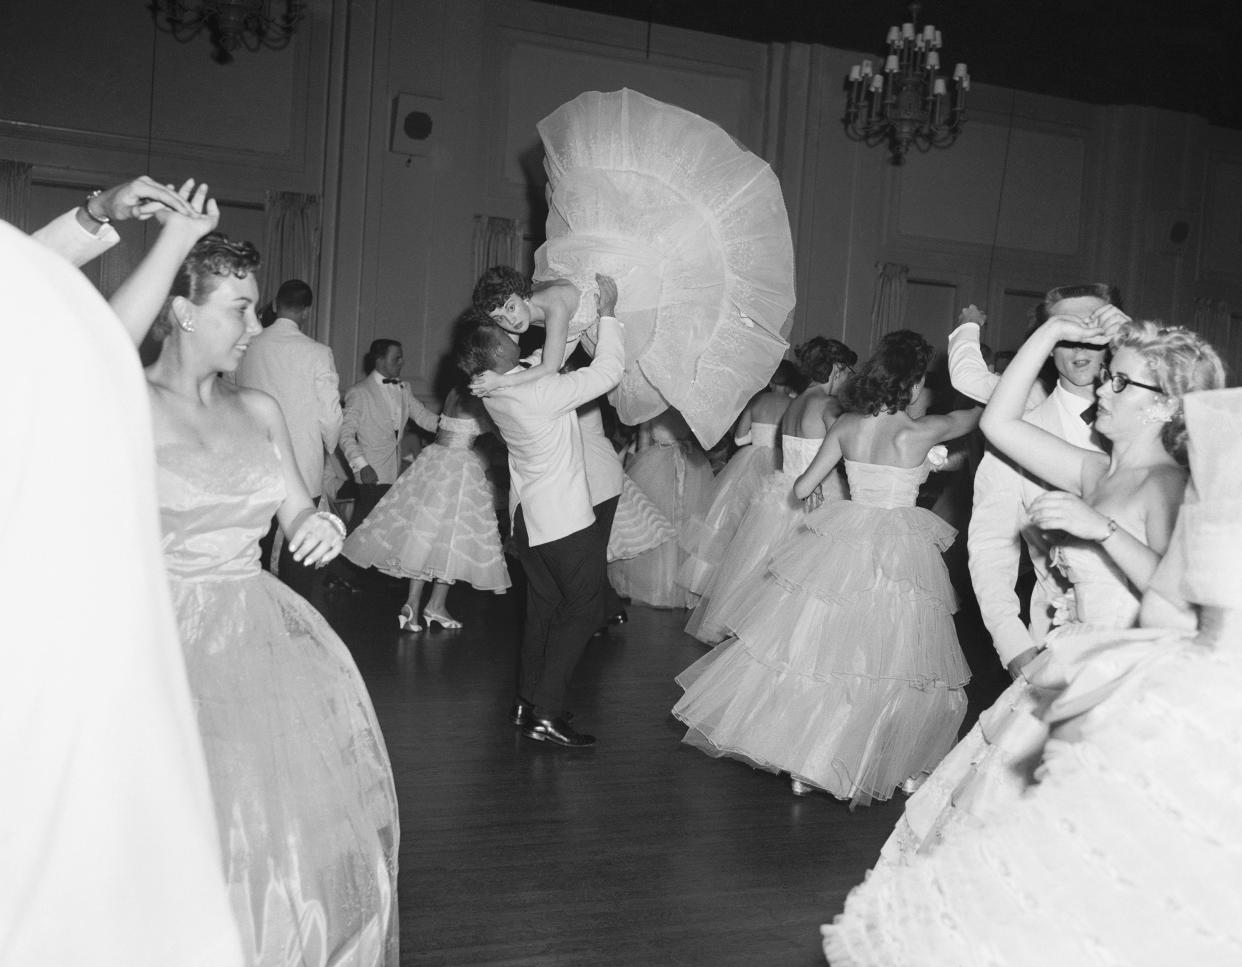 DuPont Manual High School seniors were having their prom and all was dignity and decorum until the orchestra cut loose with a few hot licks and Mary Ray Douglas, 18, and her date Joe Breen started to really to cut the rug at Louisville on June 1, 1957.